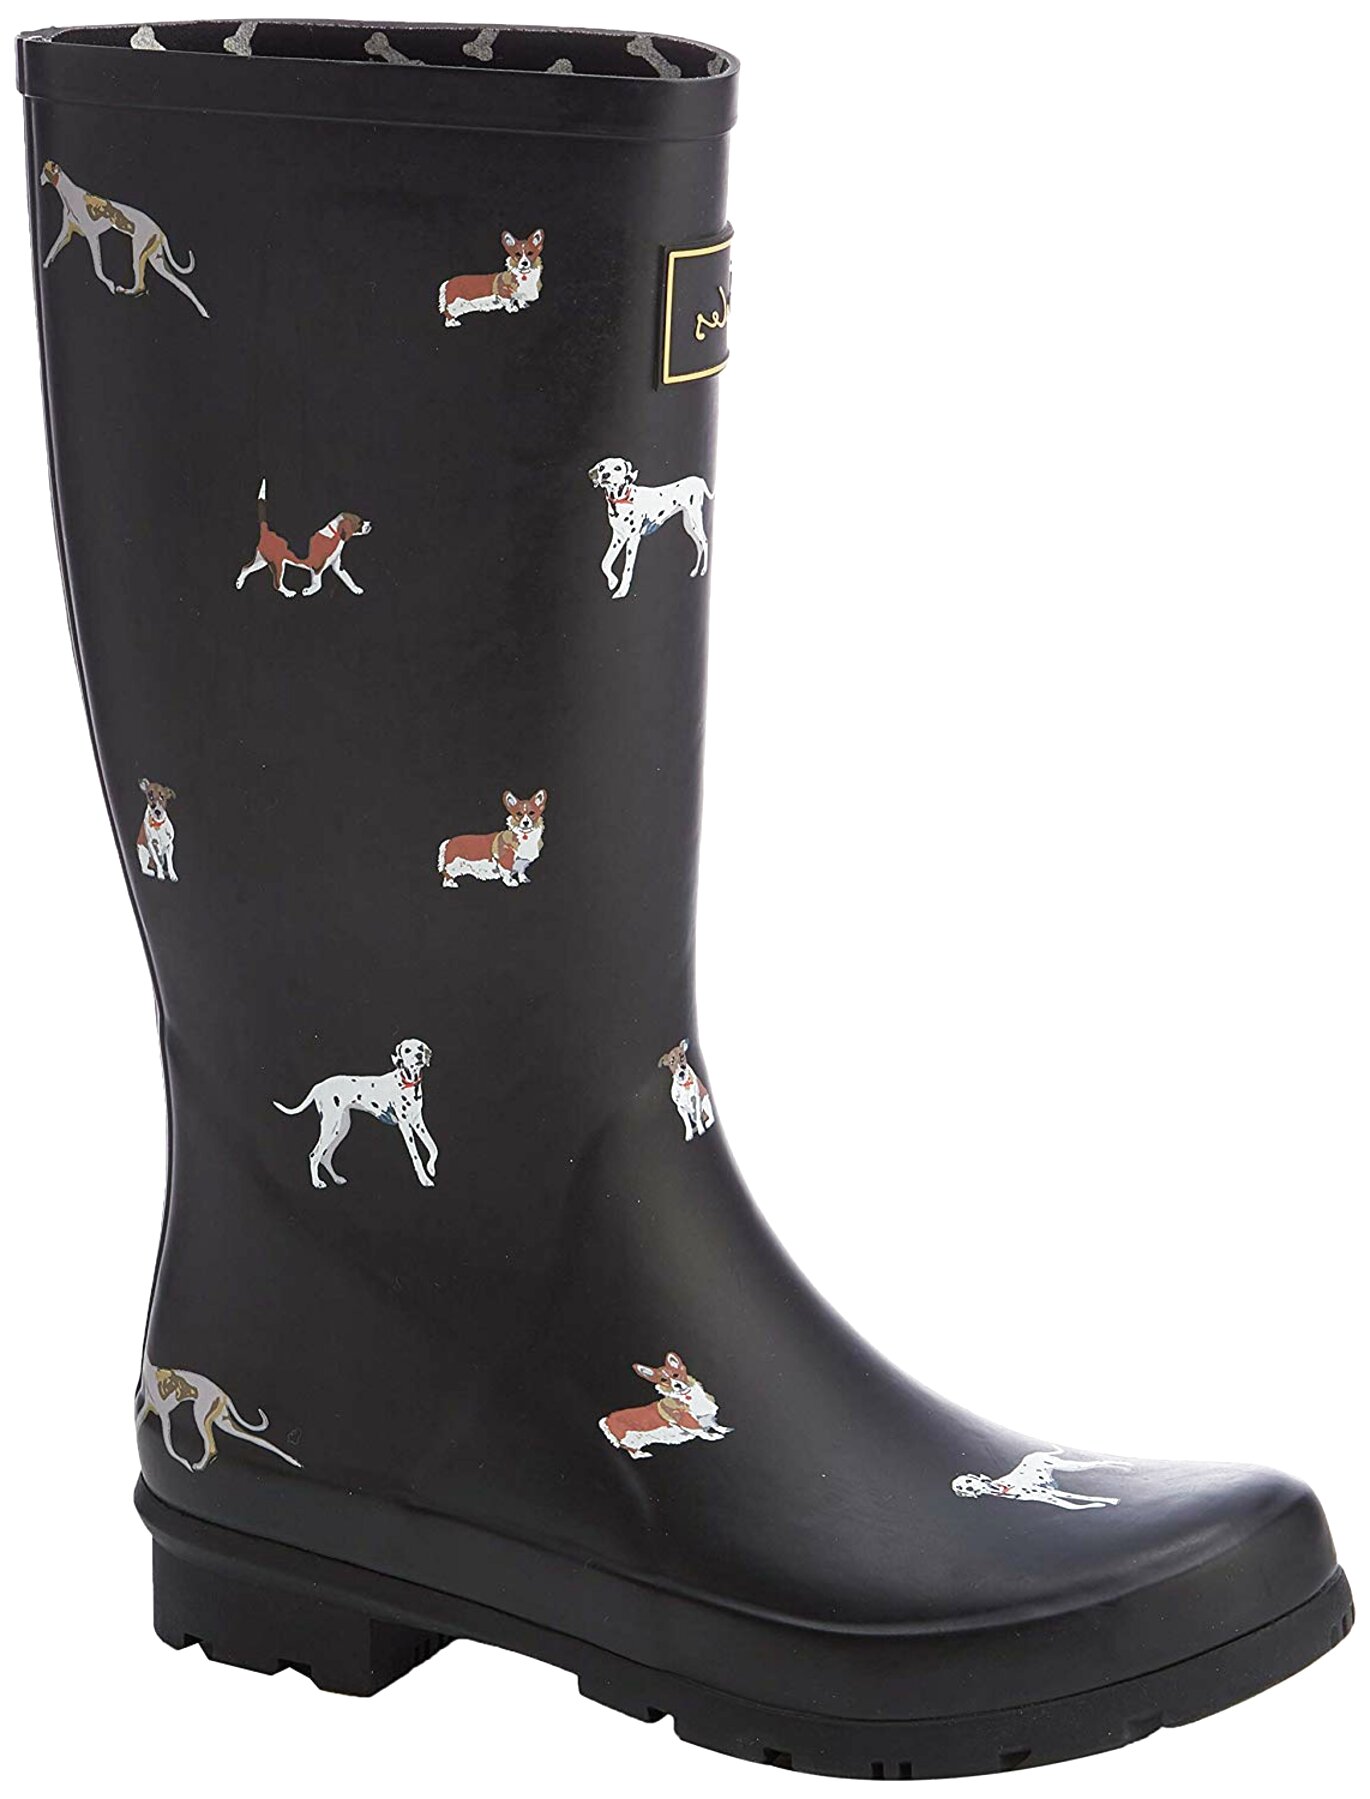 Joules Wellies for sale in UK | 73 used 